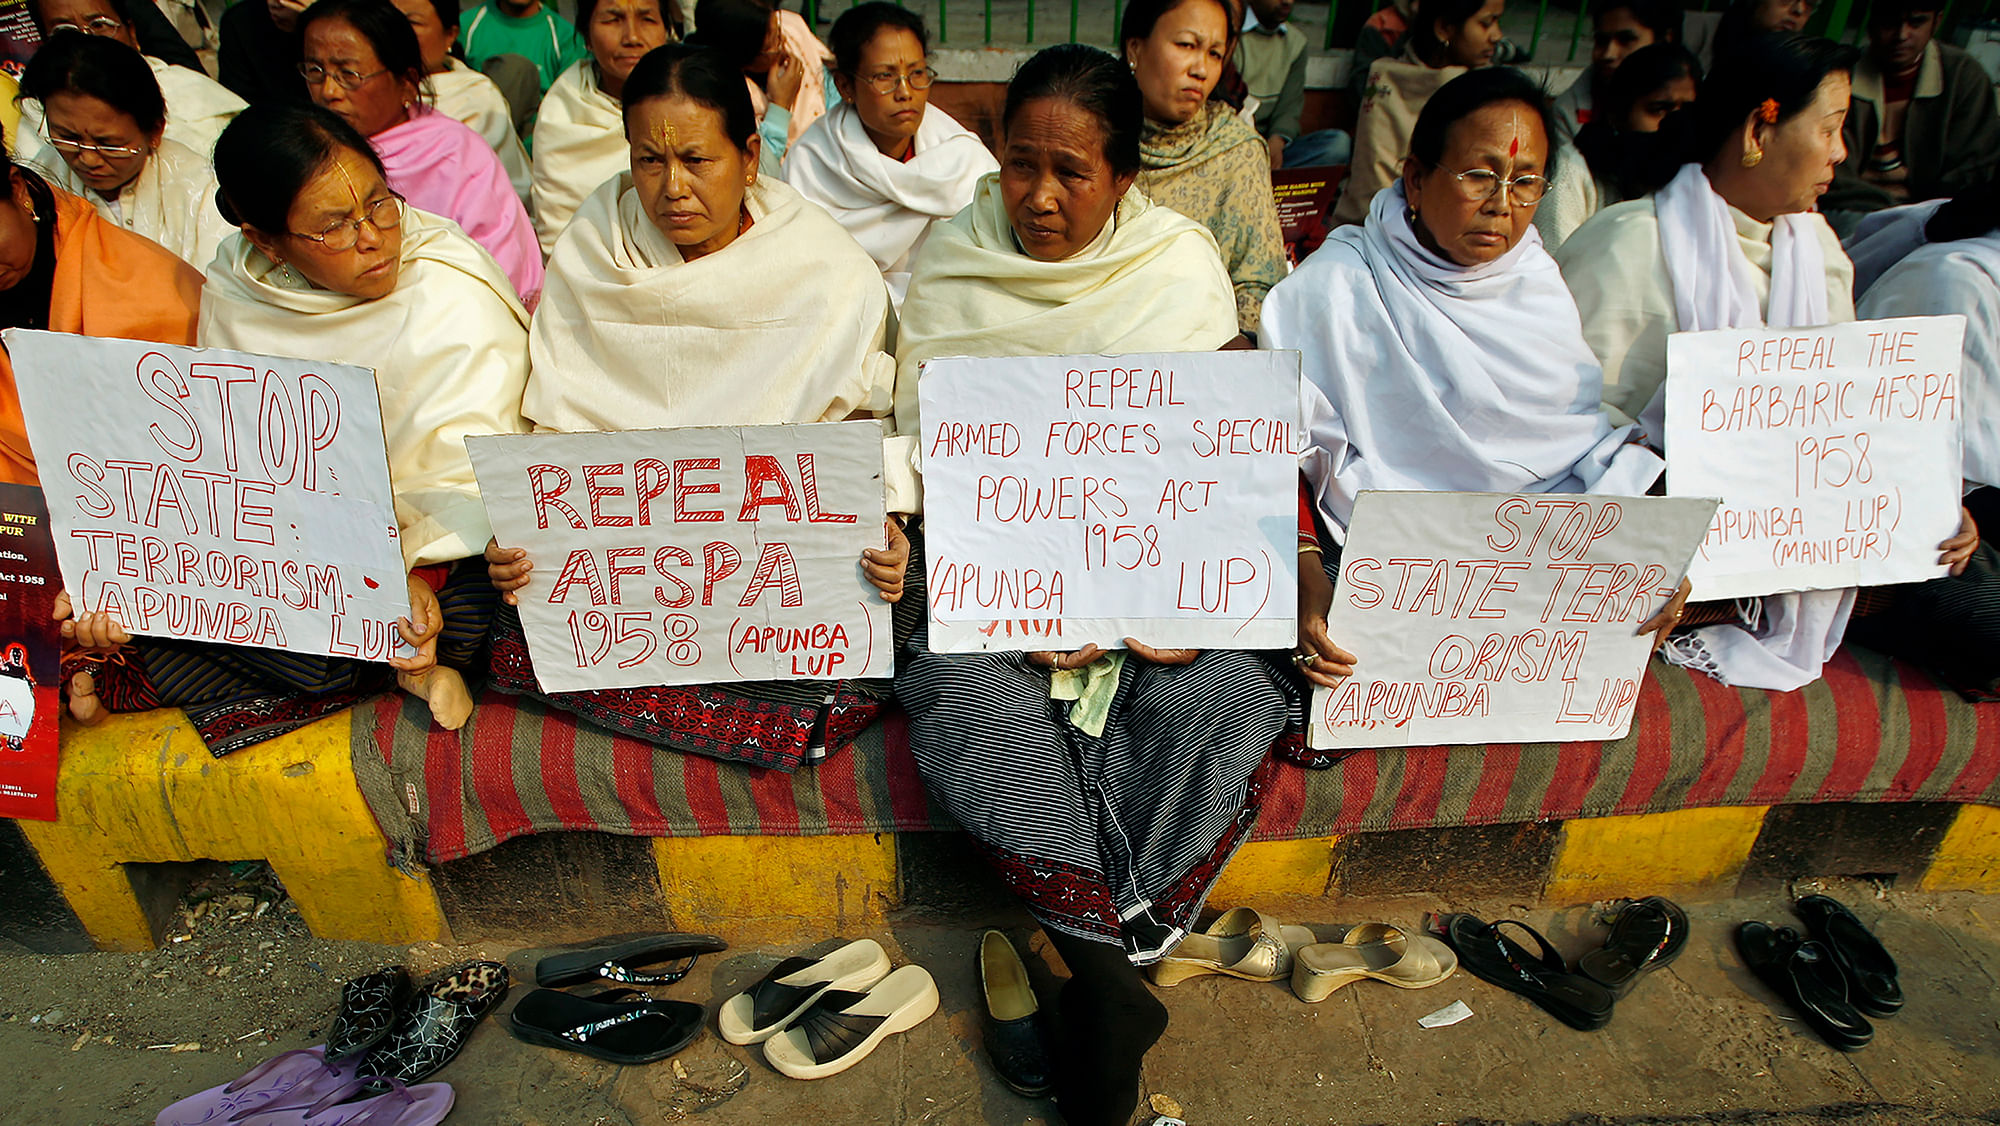 Women hold placards during a protest against the Armed Forces Special Powers Act (AFSPA).